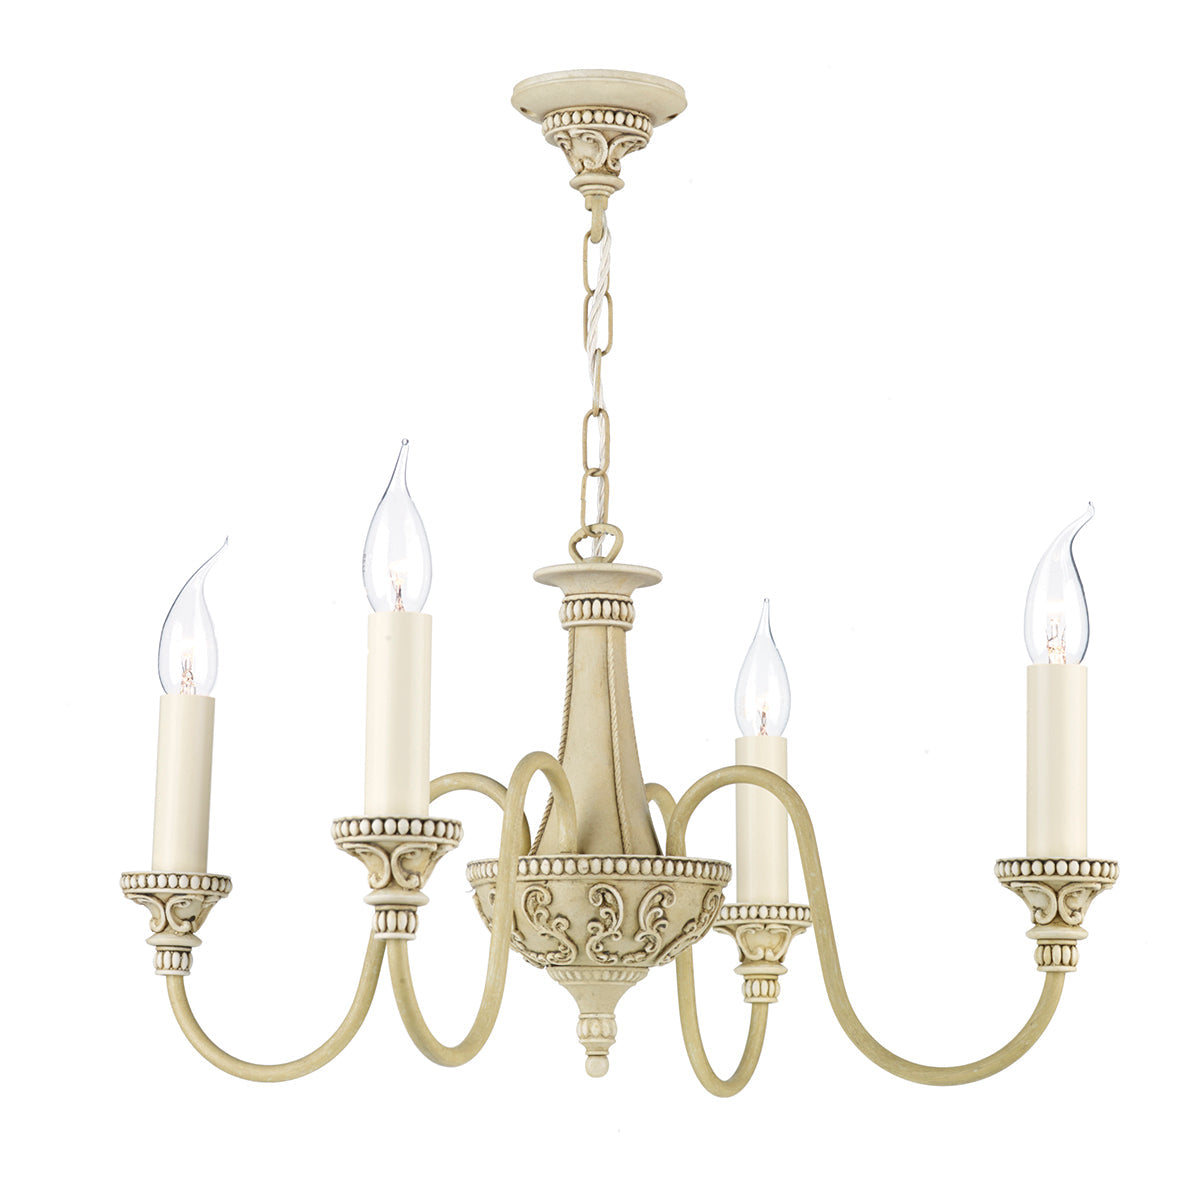 This 4 light chandelier is shown in cream the ceilibng rose has a very detailed floral pattern which has a chain from it coming down to a large central decorative centre plinth, the base of which is curved with lots of floral decoration, there are 4 curved arms coming off the central stem to the lamp holders which the base of the bulb holders are also floral decorated. There are long elongated candle drips covering the inner bulb holder.